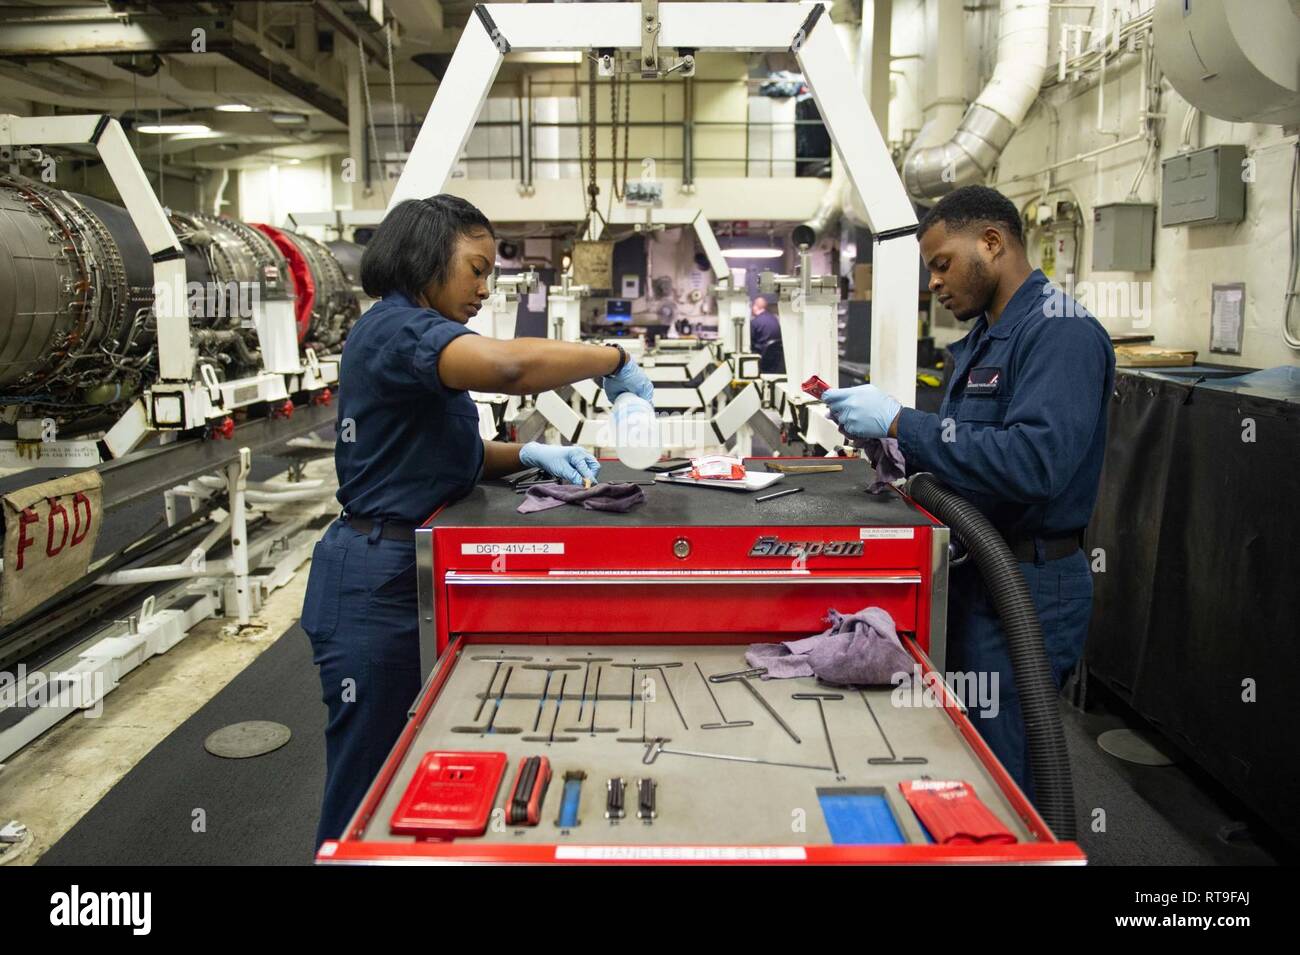 U.S. Navy Aviation Machinist’s Mate 3rd Class Yanique Johnson, left, from Fort Lauderdale, Florida, and Aviation Machinist’s Mate Airman Quintavious Haugadook, from Atlanta, clean tools in the jet shop aboard the aircraft carrier USS John C. Stennis (CVN 74) in the Indian Ocean, Jan. 29, 2019. The John C. Stennis is deployed to the U.S. 7th Fleet area of operations in support of security and stability in the Indo-Pacific region. Stock Photo